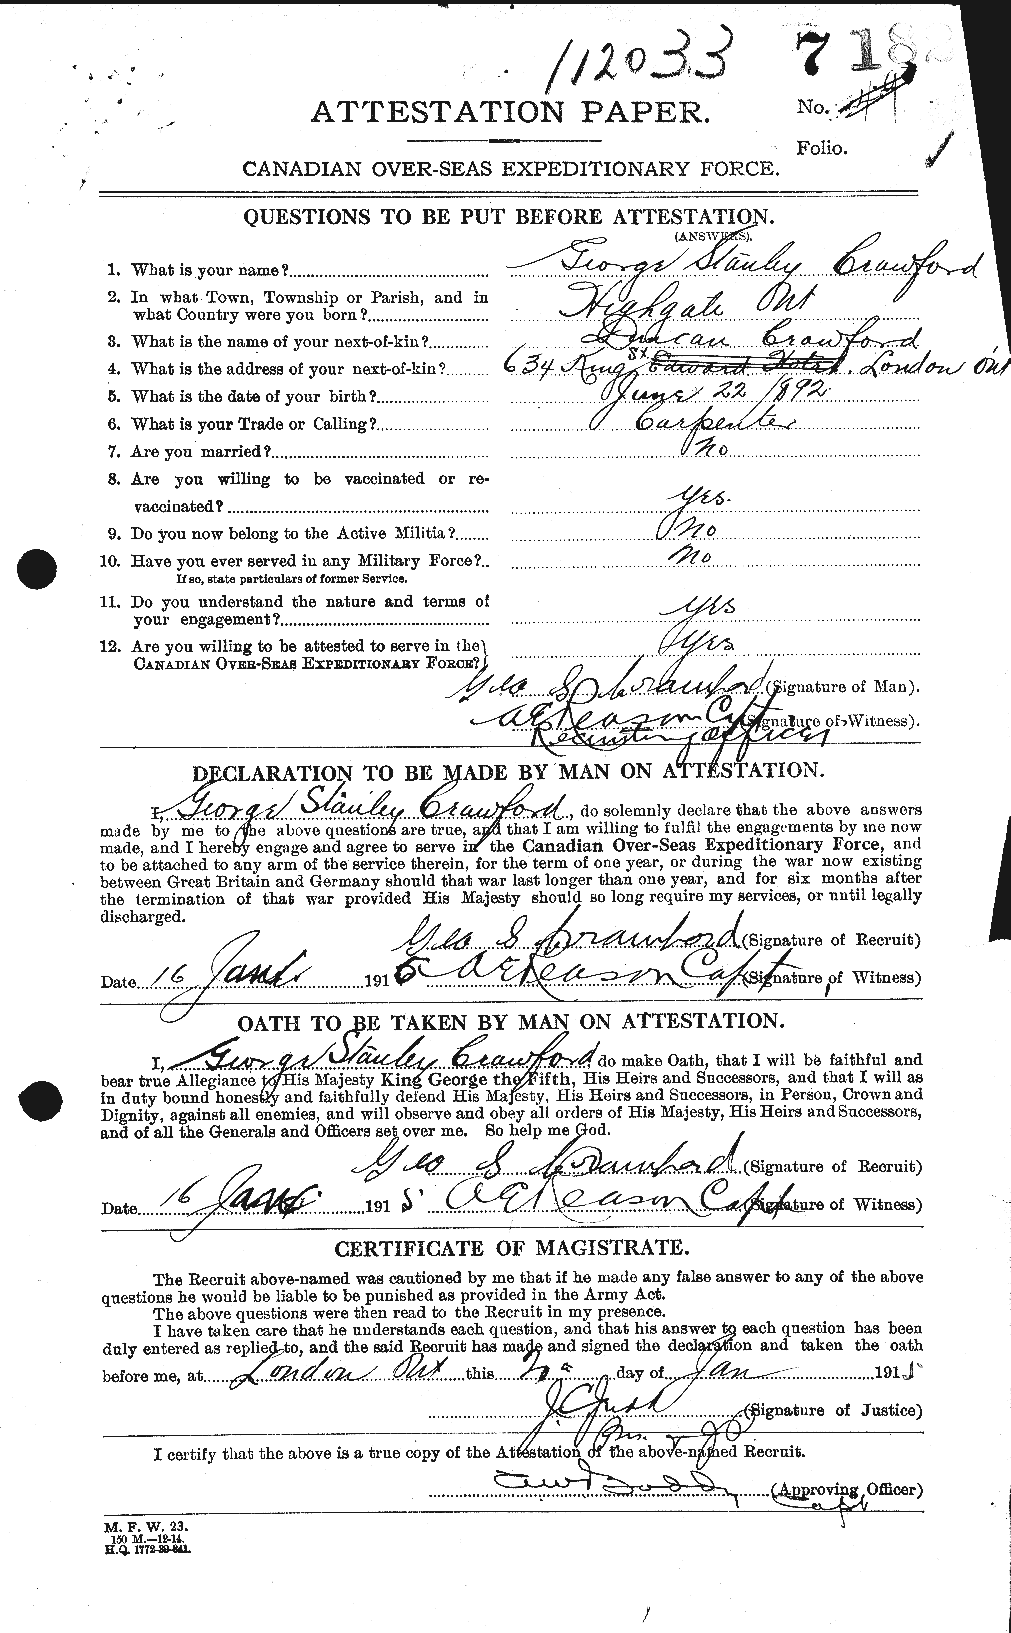 Personnel Records of the First World War - CEF 060702a